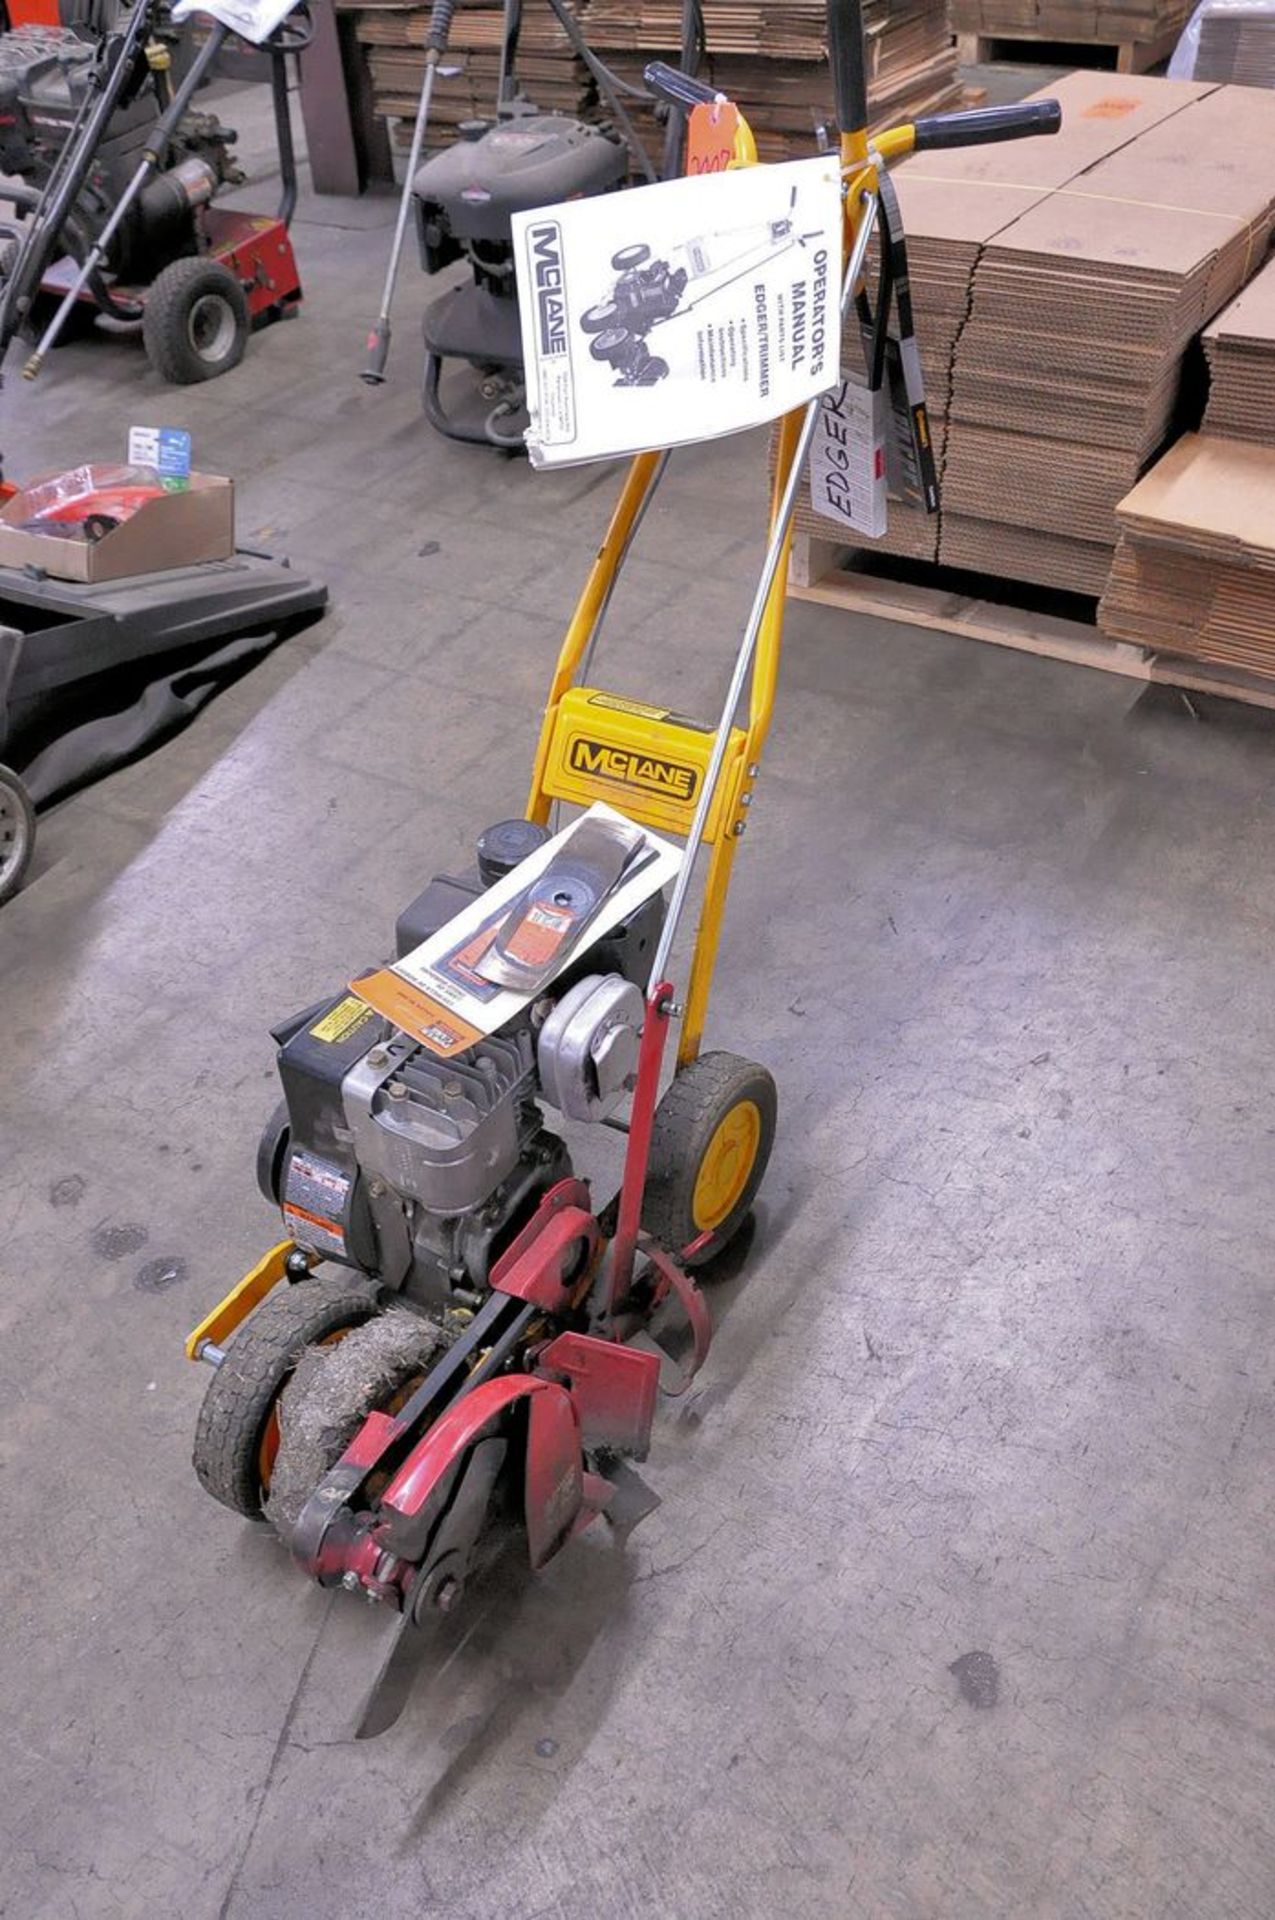 McLane Model 801-3.5RP Gas Powered Lawn Edger; with Briggs & Stratton 3.5-HP Motor and 9 in. x 2 in.